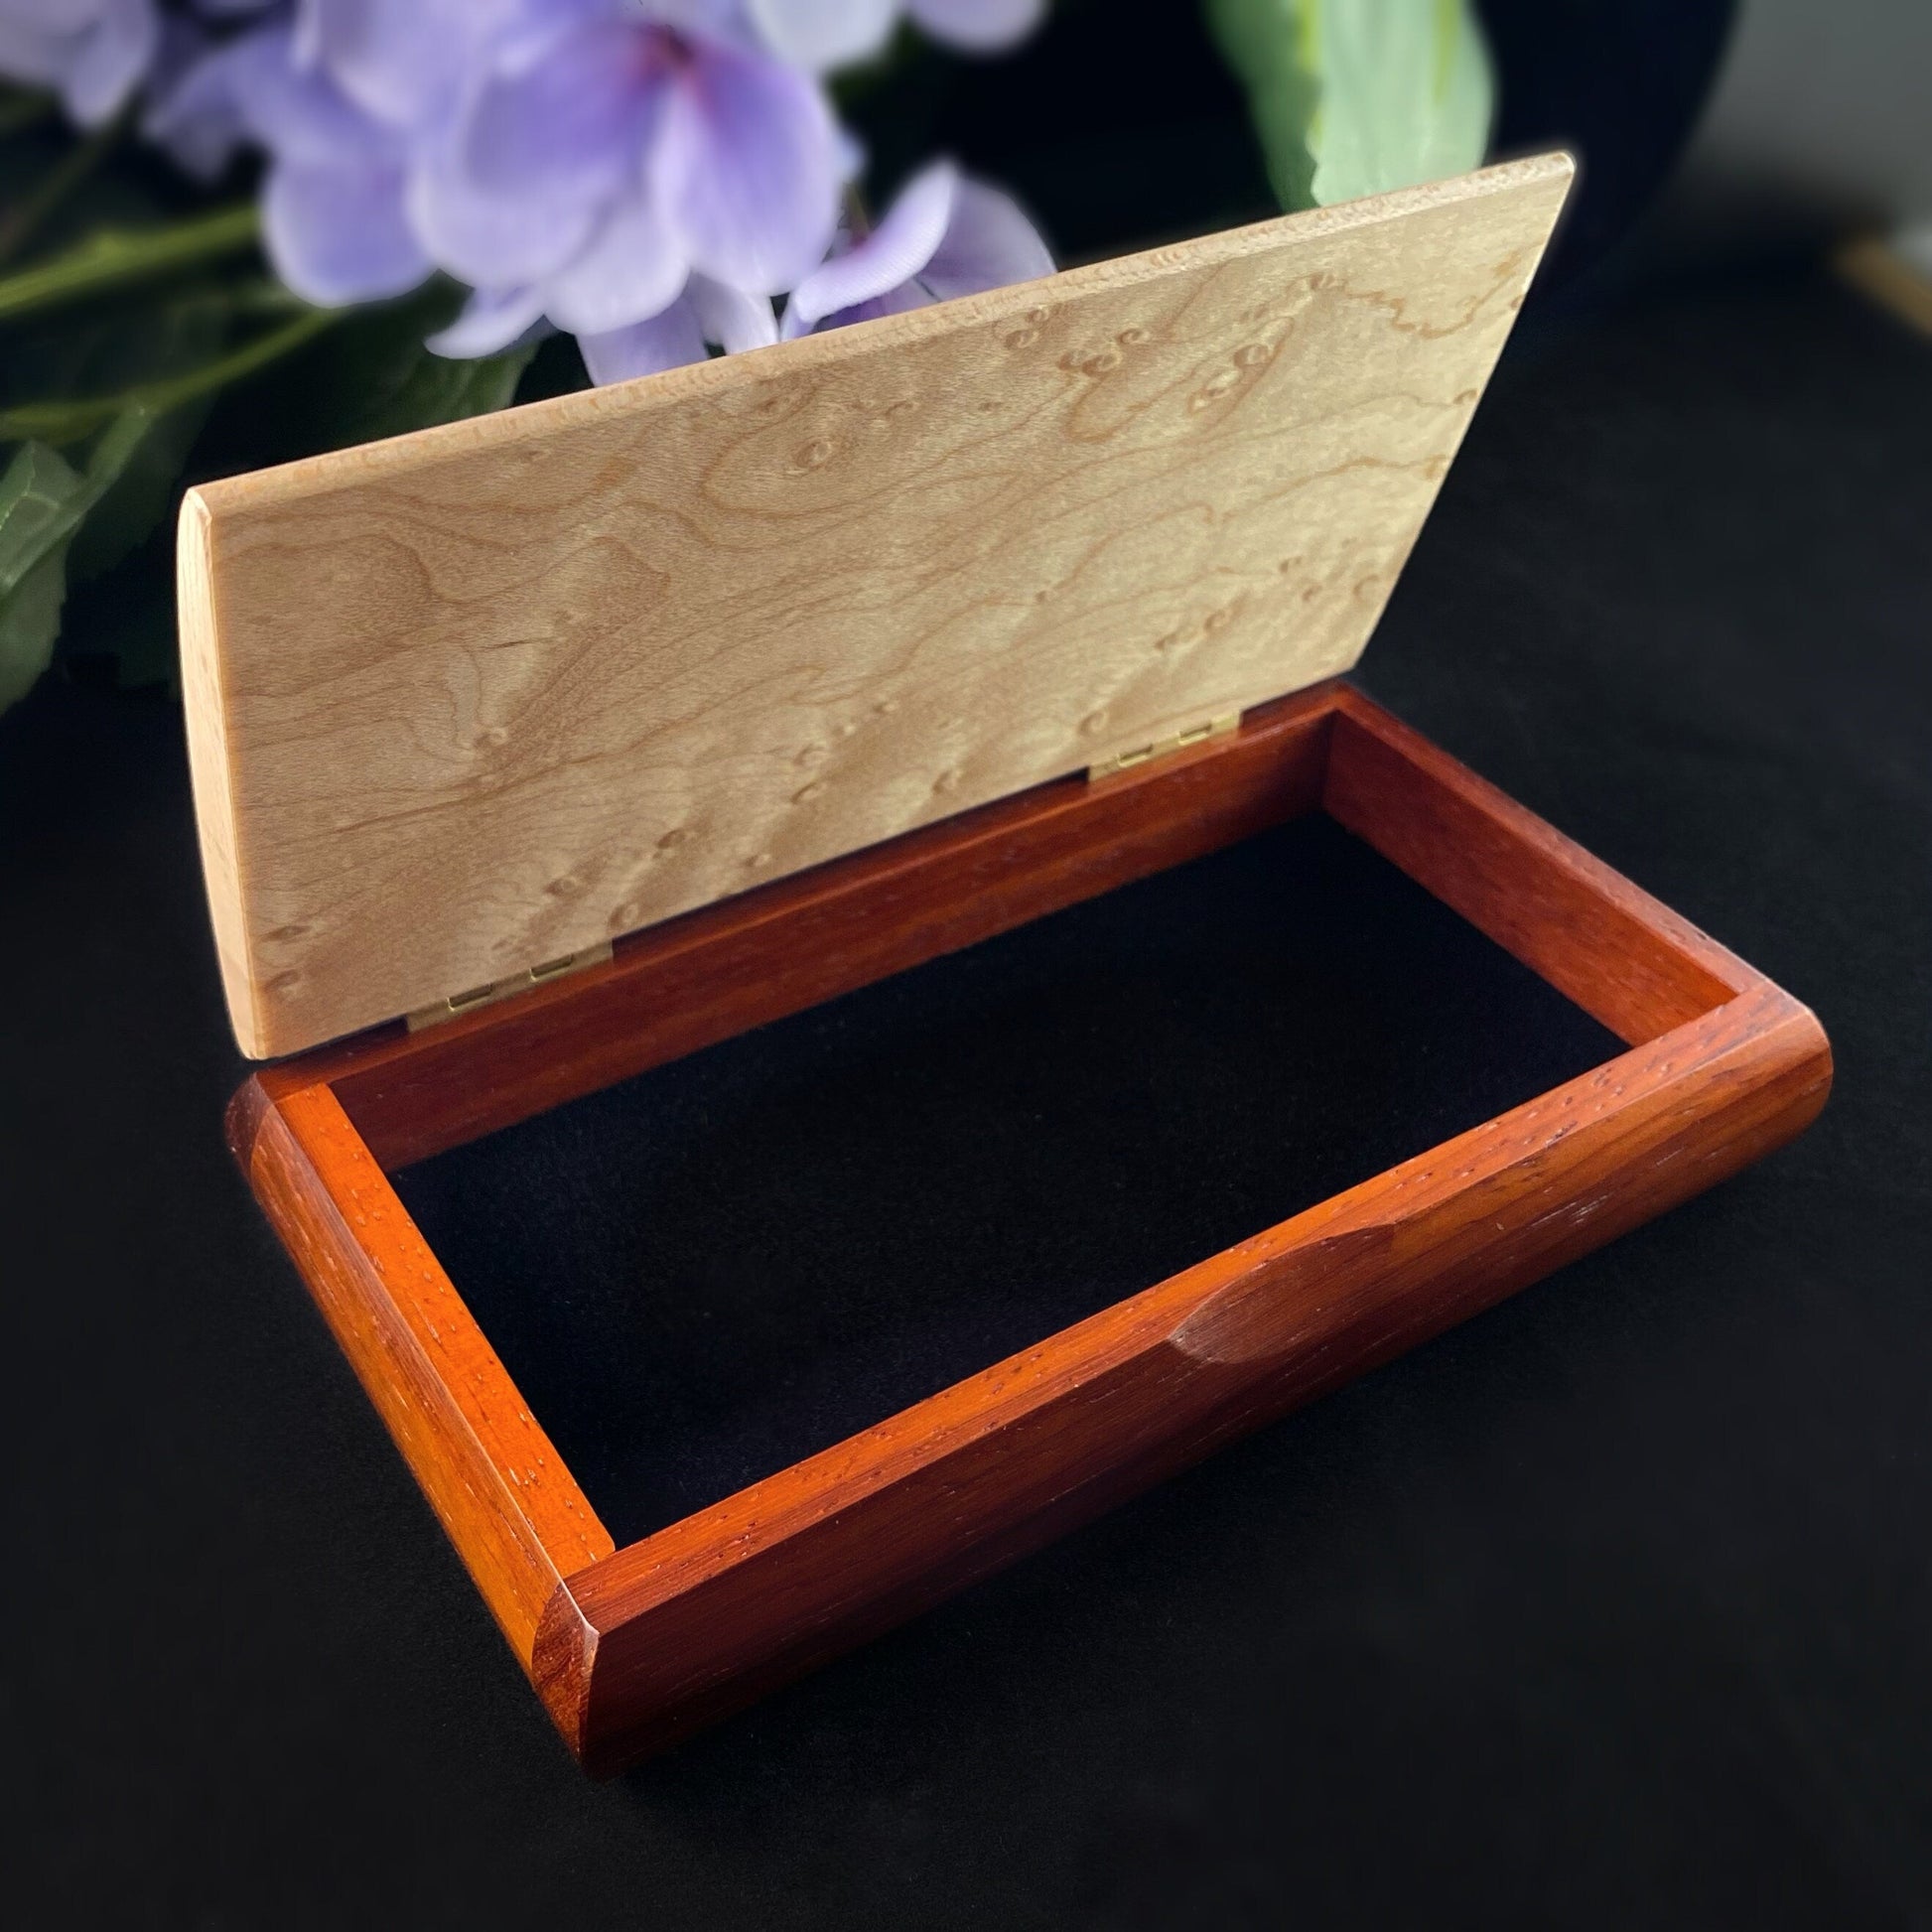 Handmade Wooden Box with Curly Maple and Padauk, Made in USA